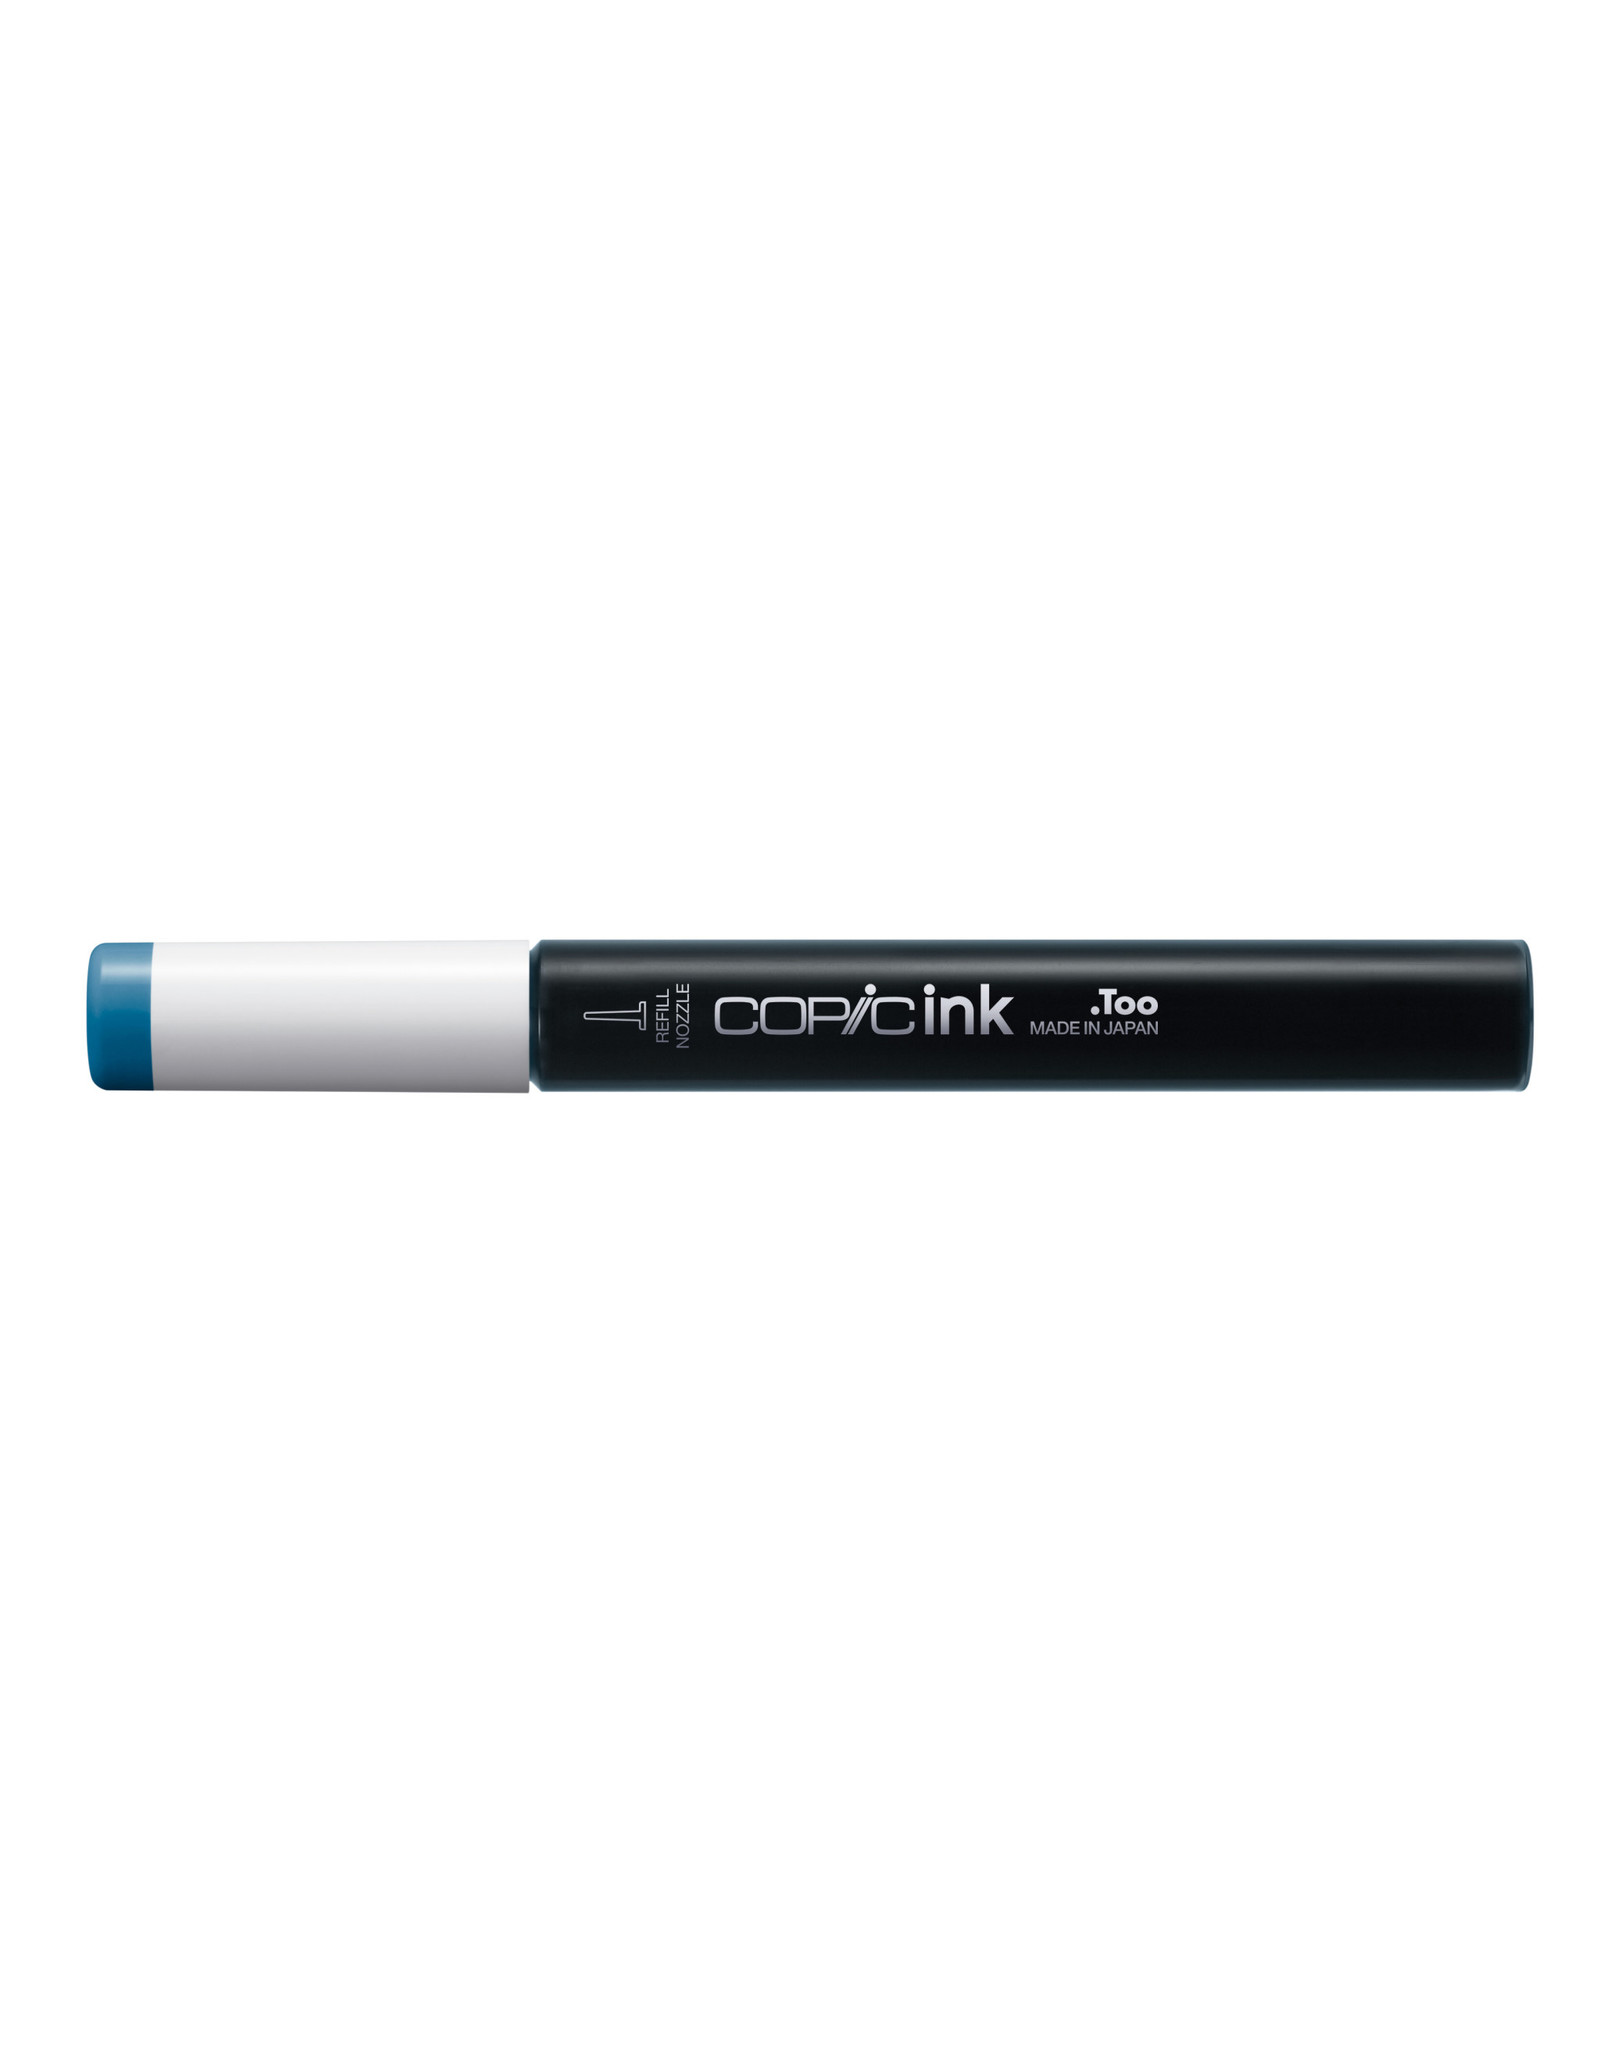 COPIC COPIC Ink 12ml B06 Peacock Blue